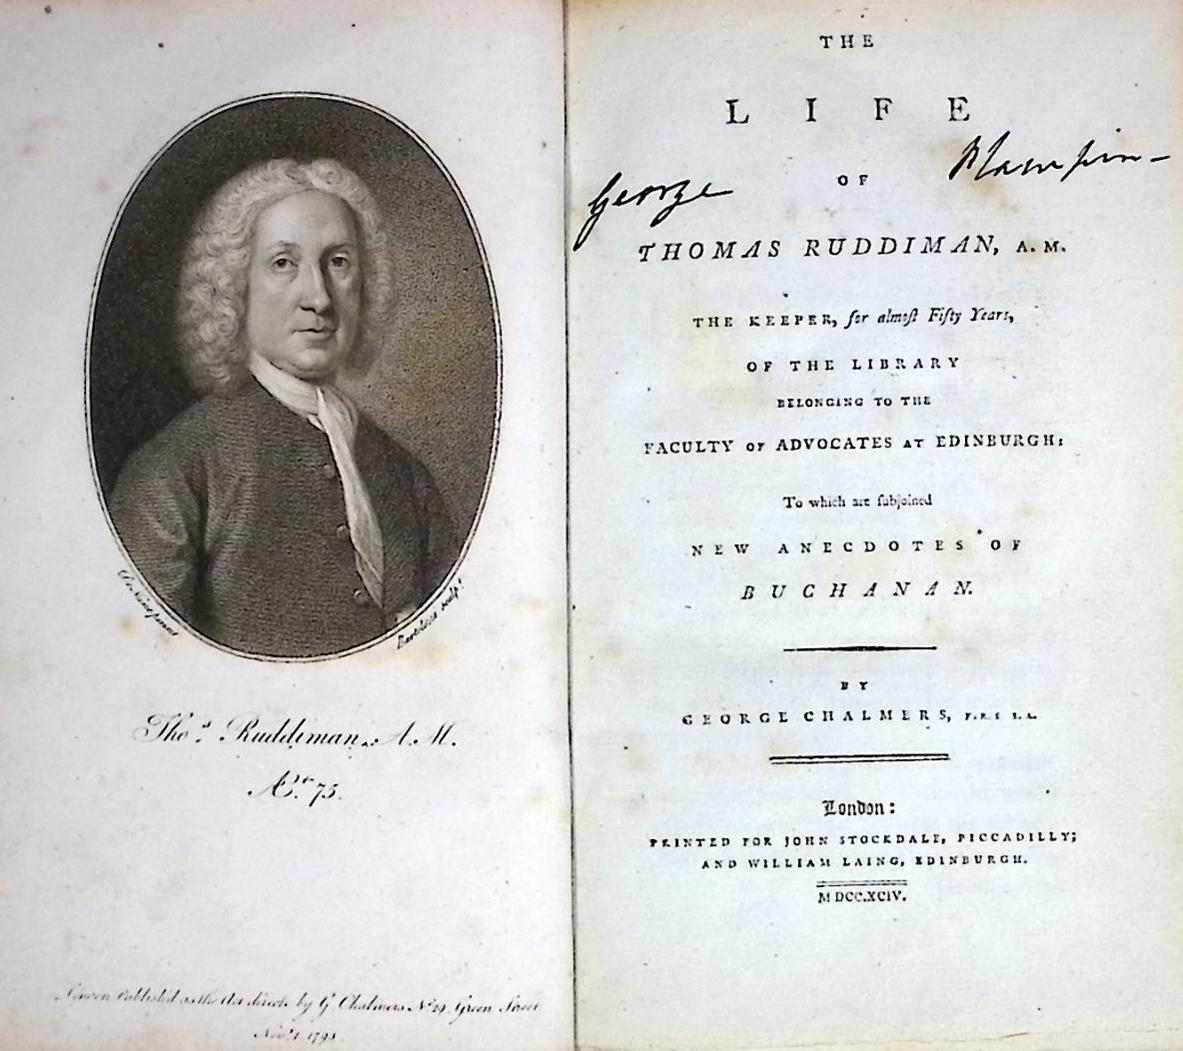 The Life of Thomas Ruddiman To Which are Subjoined New Anecdotes of Buchanan.